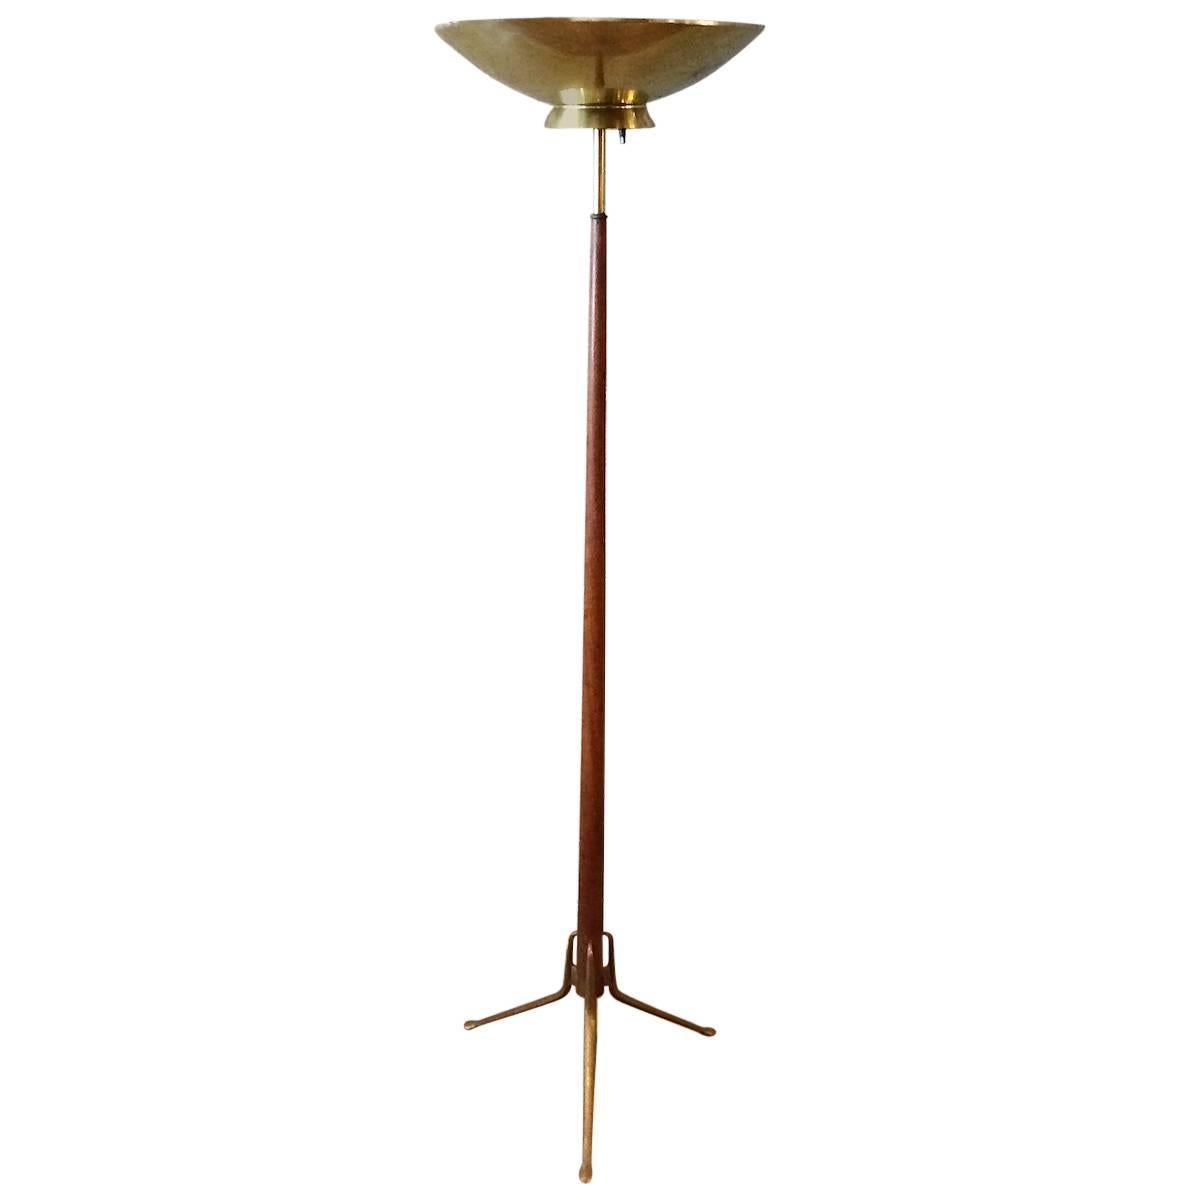 Walnut and Brass Torchiere Floor Lamp by Gerald Thurston for Lightolier